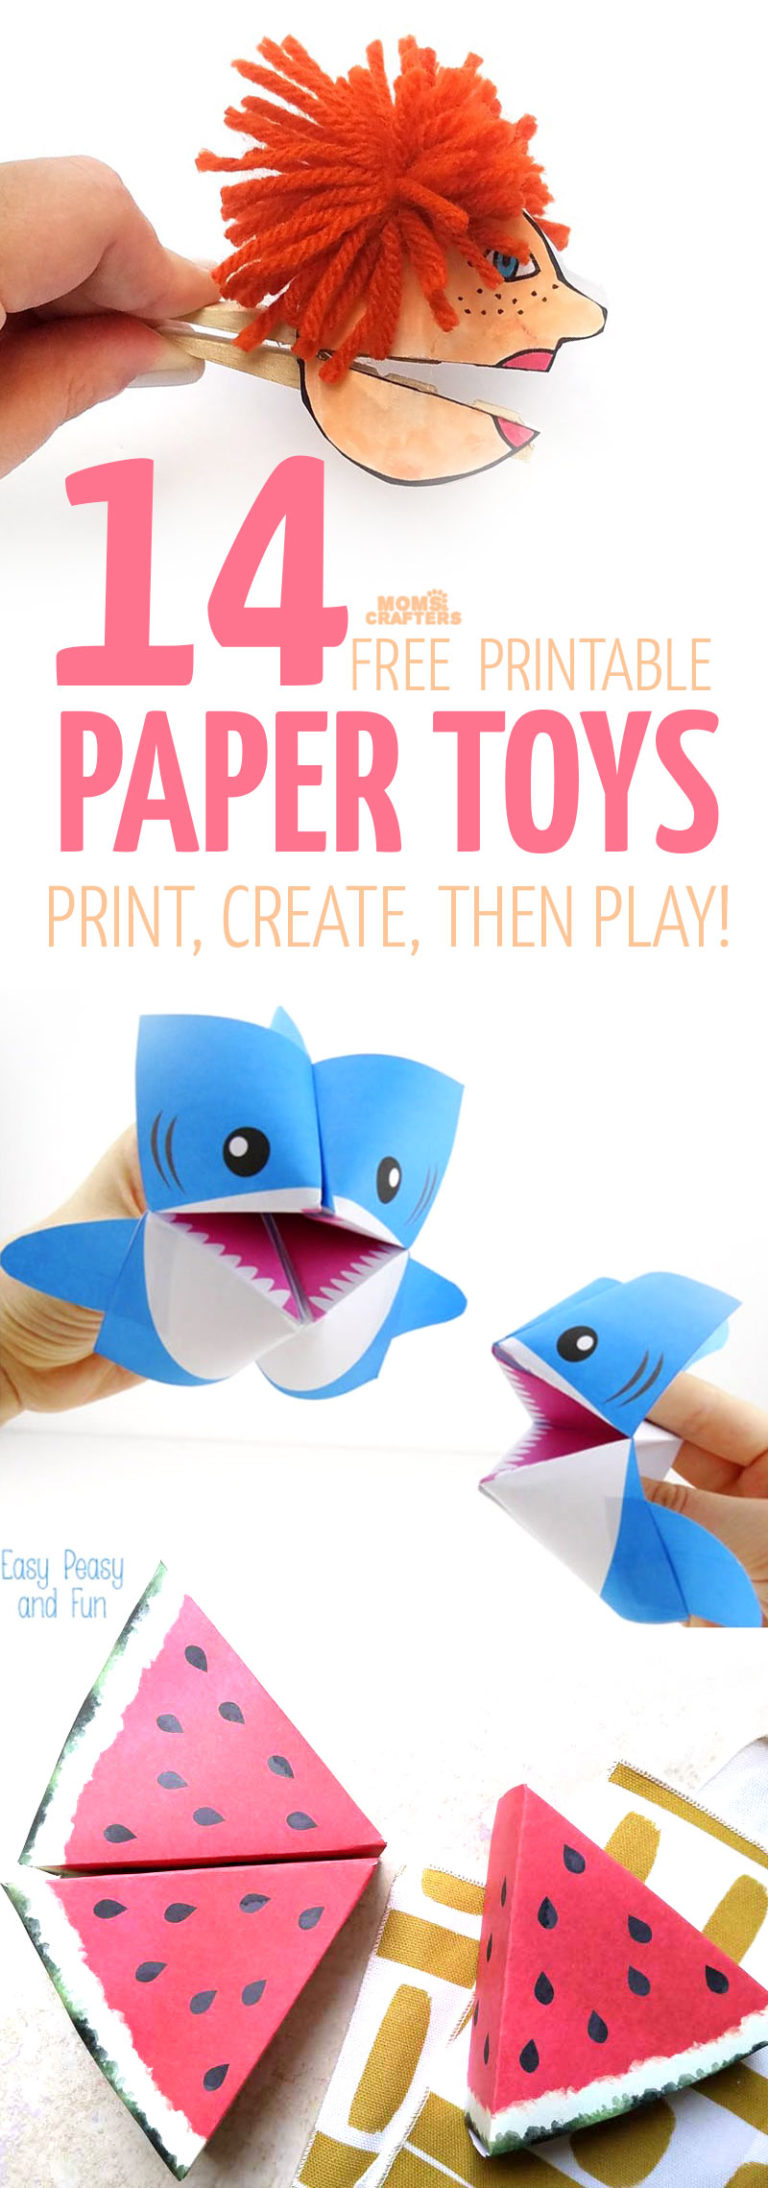 paper-toy-templates-14-free-printables-to-craft-and-play